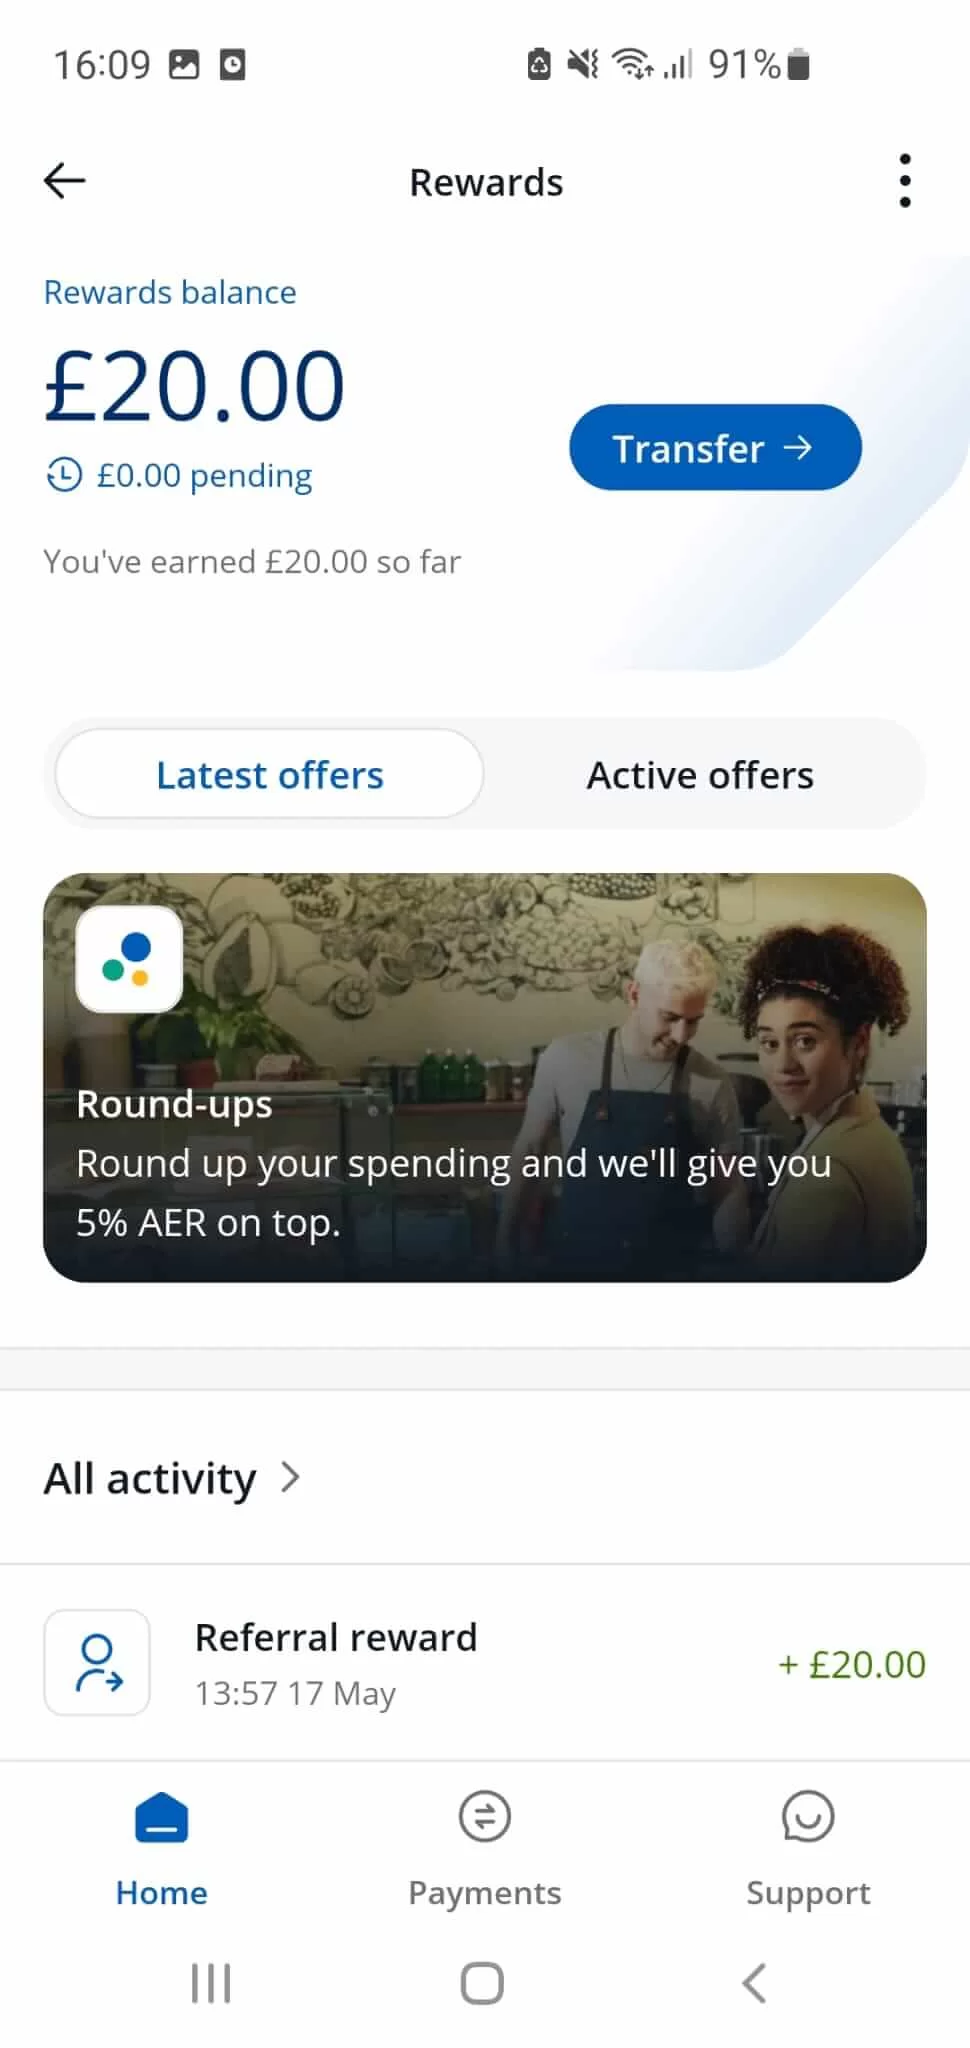 Chase referral reward: 20 GBP added to your account when you use a referral code